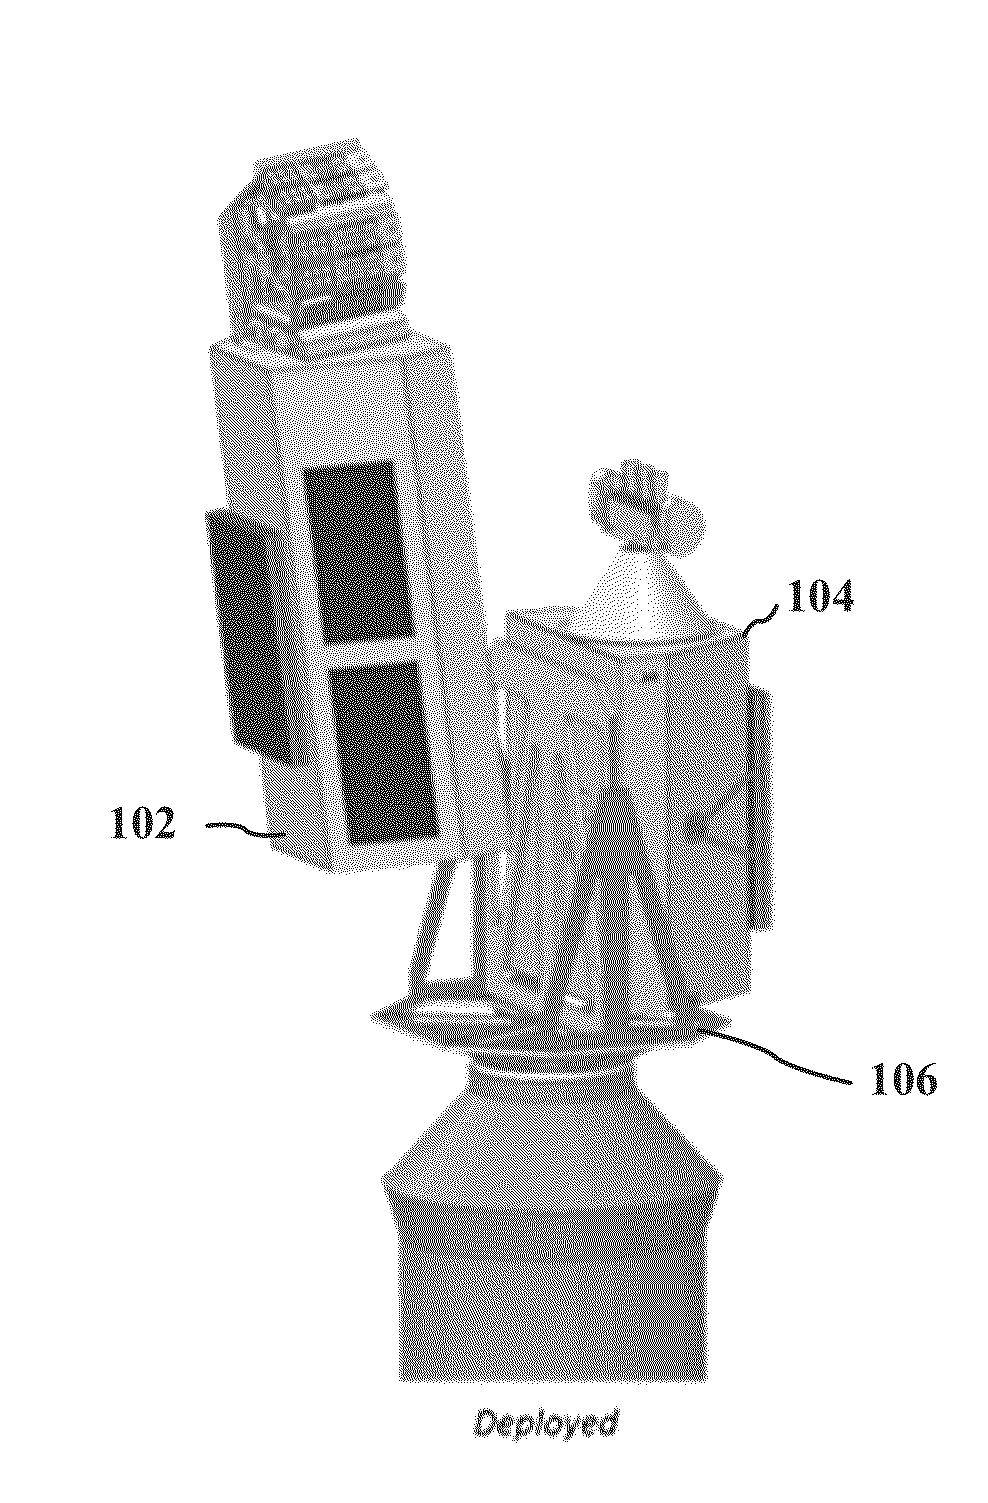 Dual spacecraft design and deployment system and method of use thereof